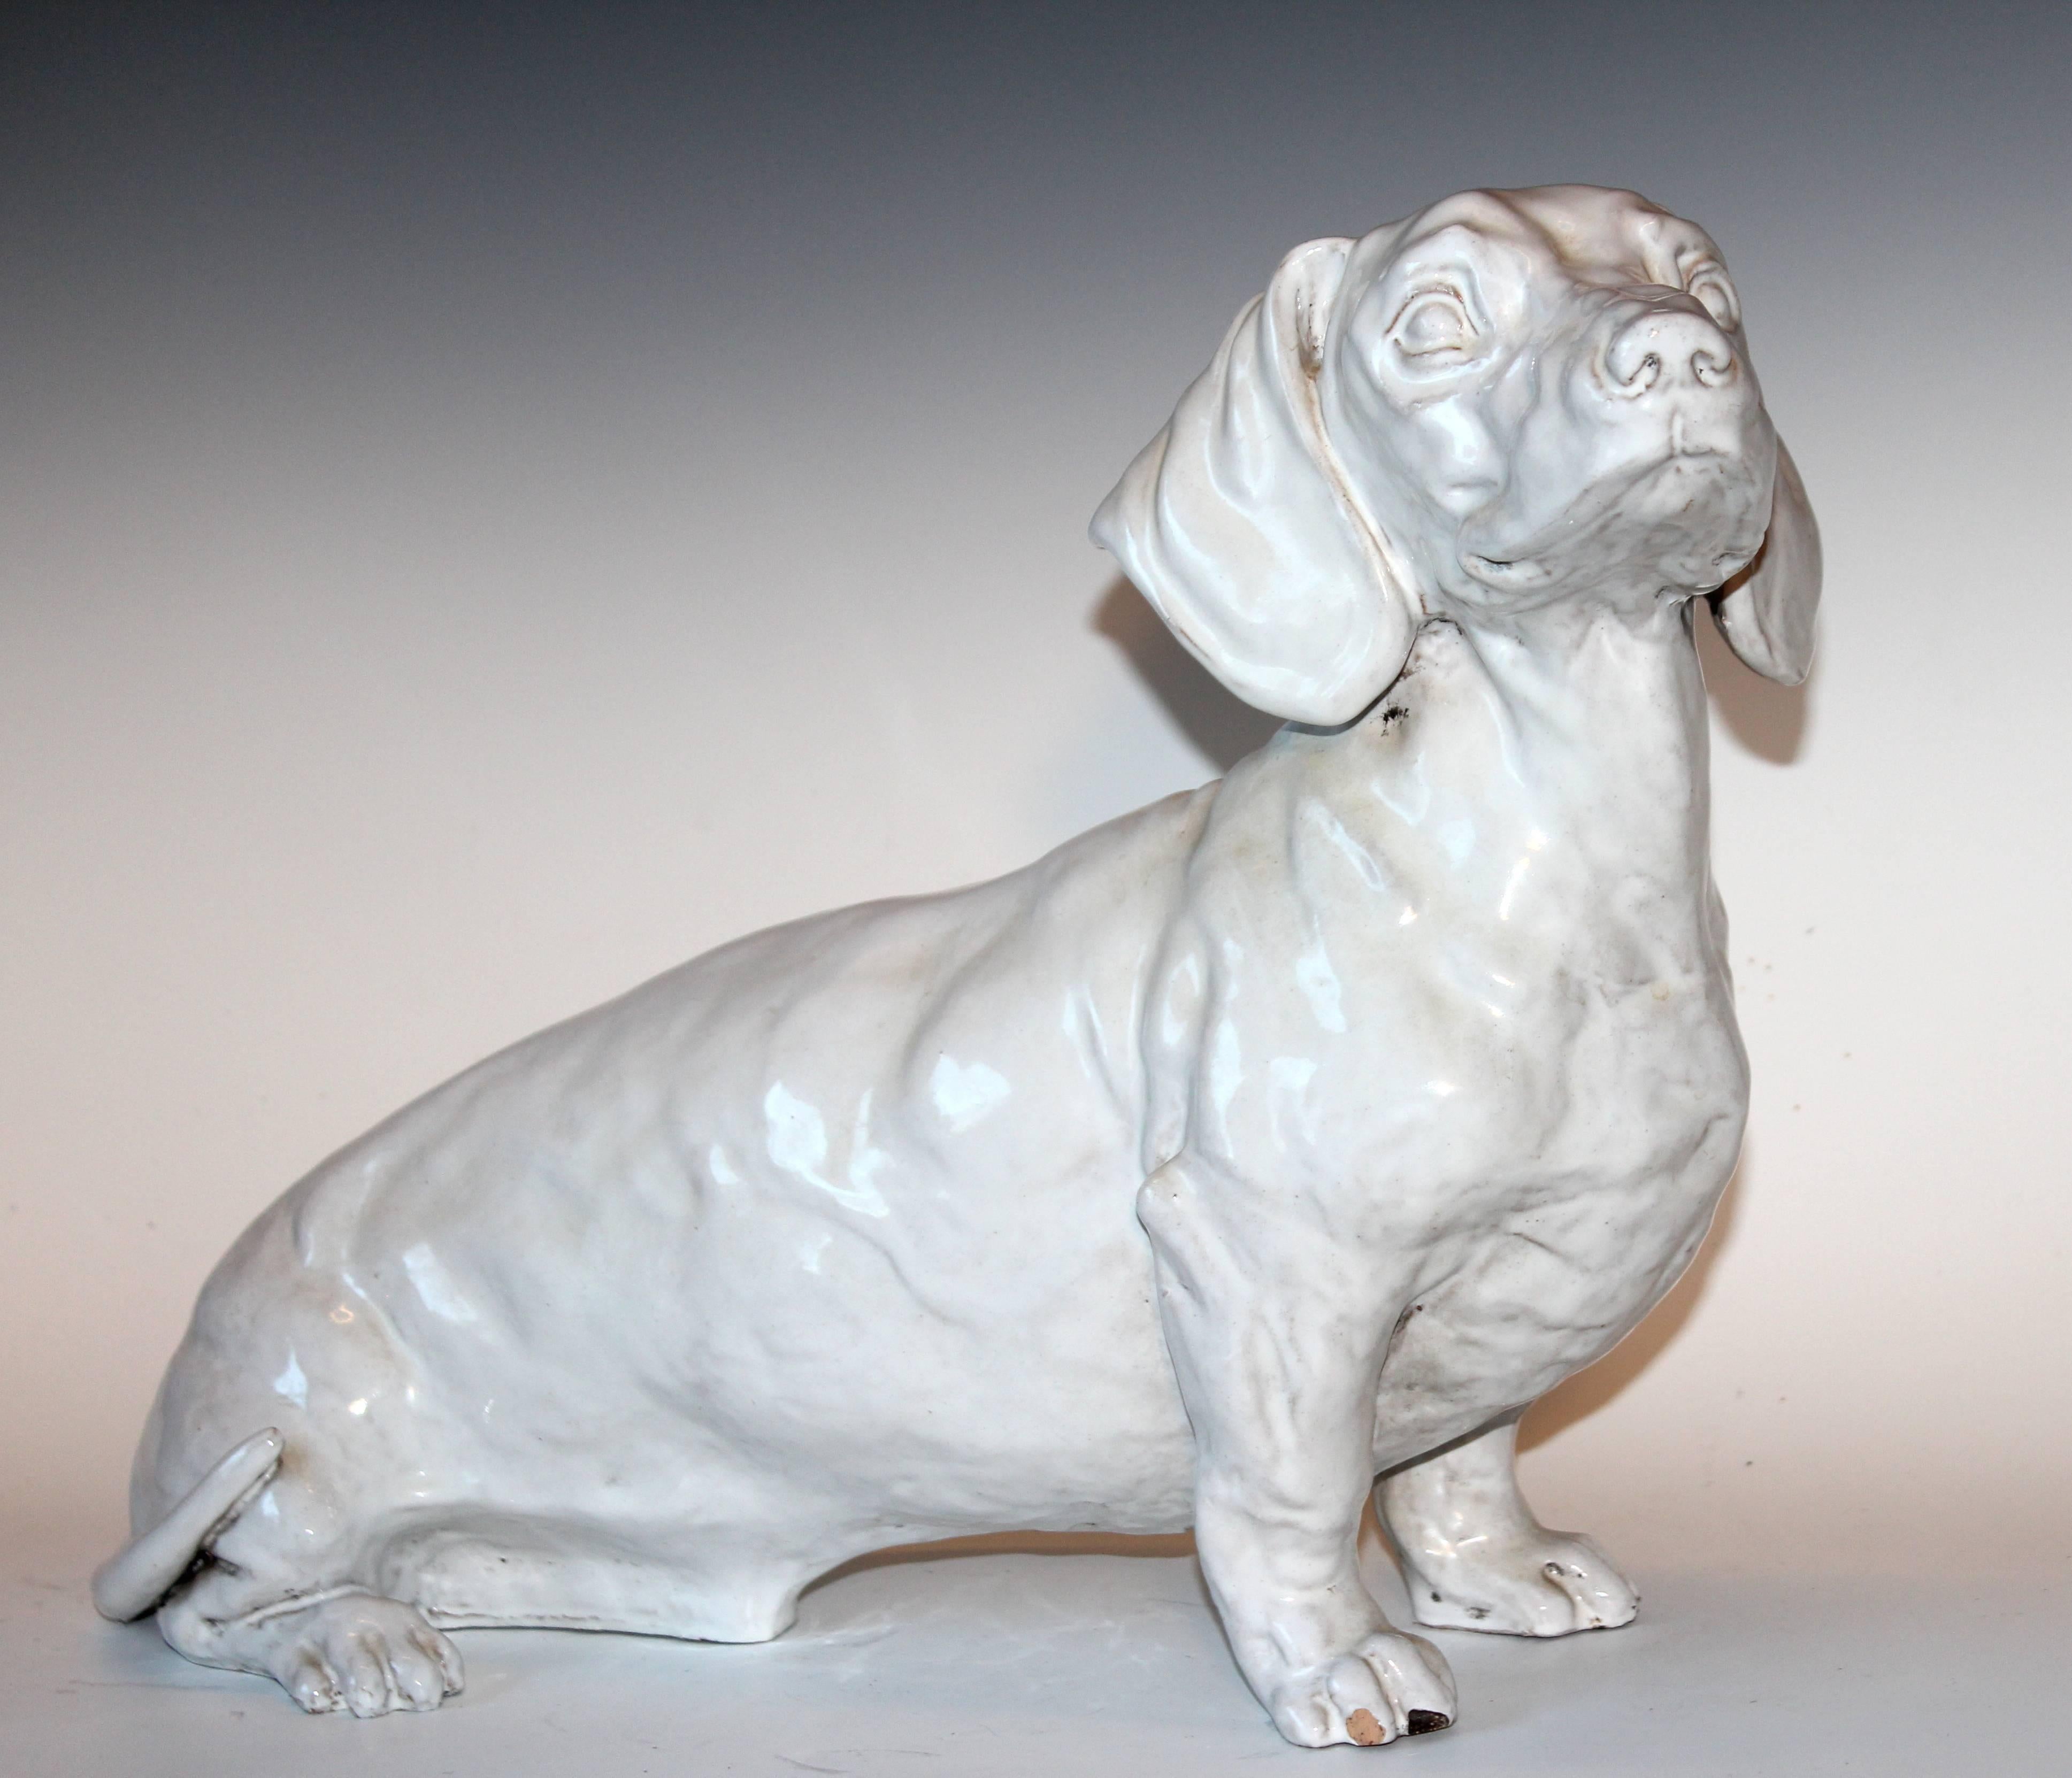 Large Italian pottery Dachshund figure half sitting with pensive expression. Circa mid-20th century. Heavy press molded piece. 22